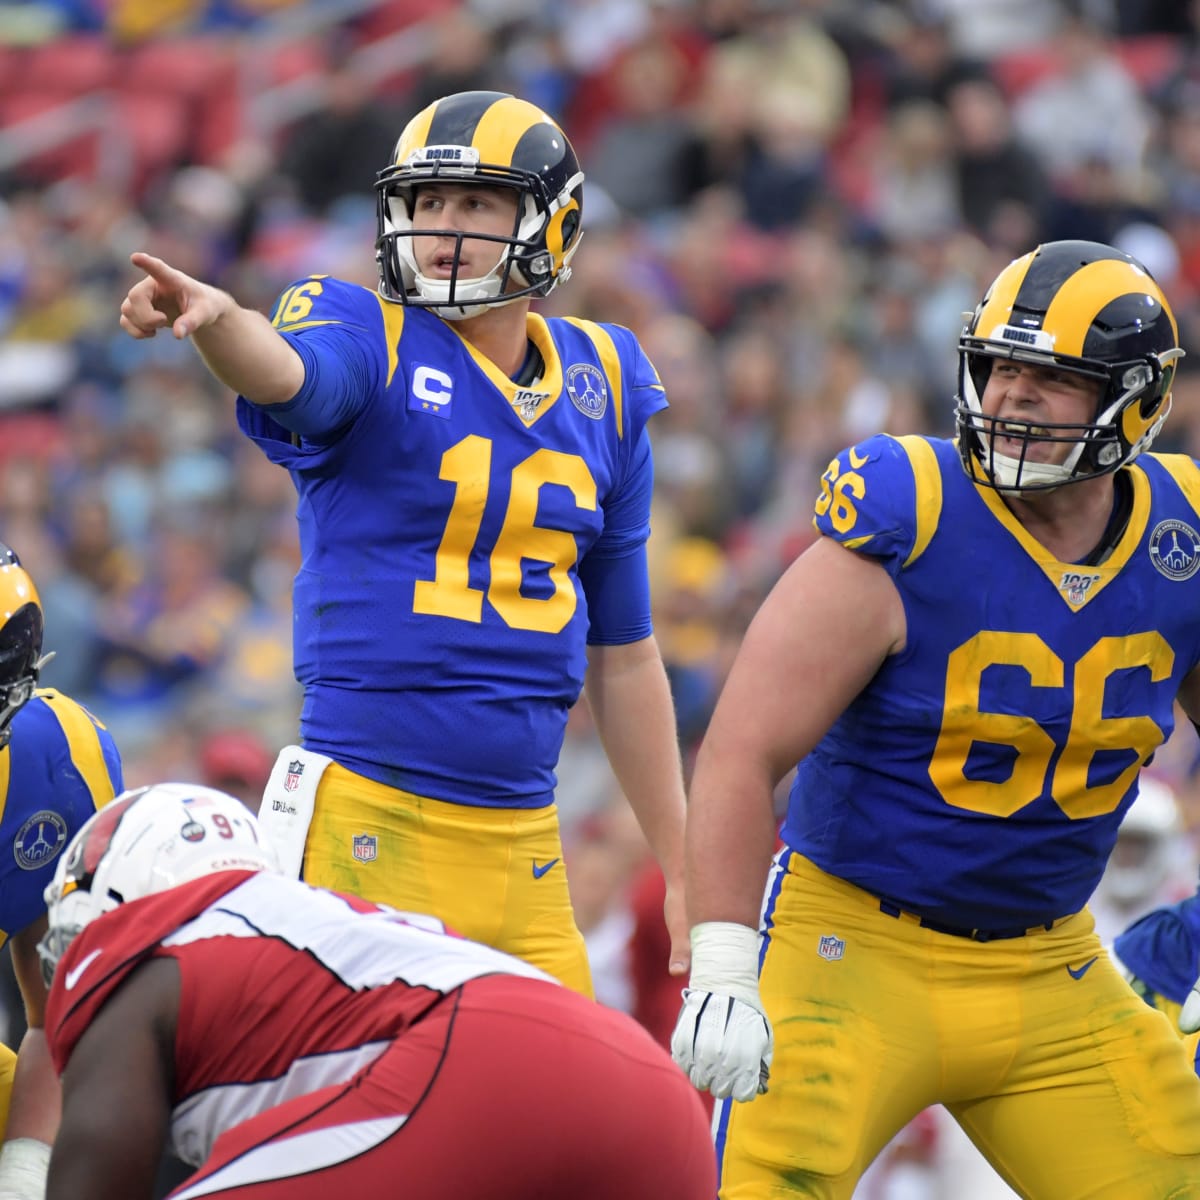 Morning links: Are Rams Super Bowl contenders? - Sports